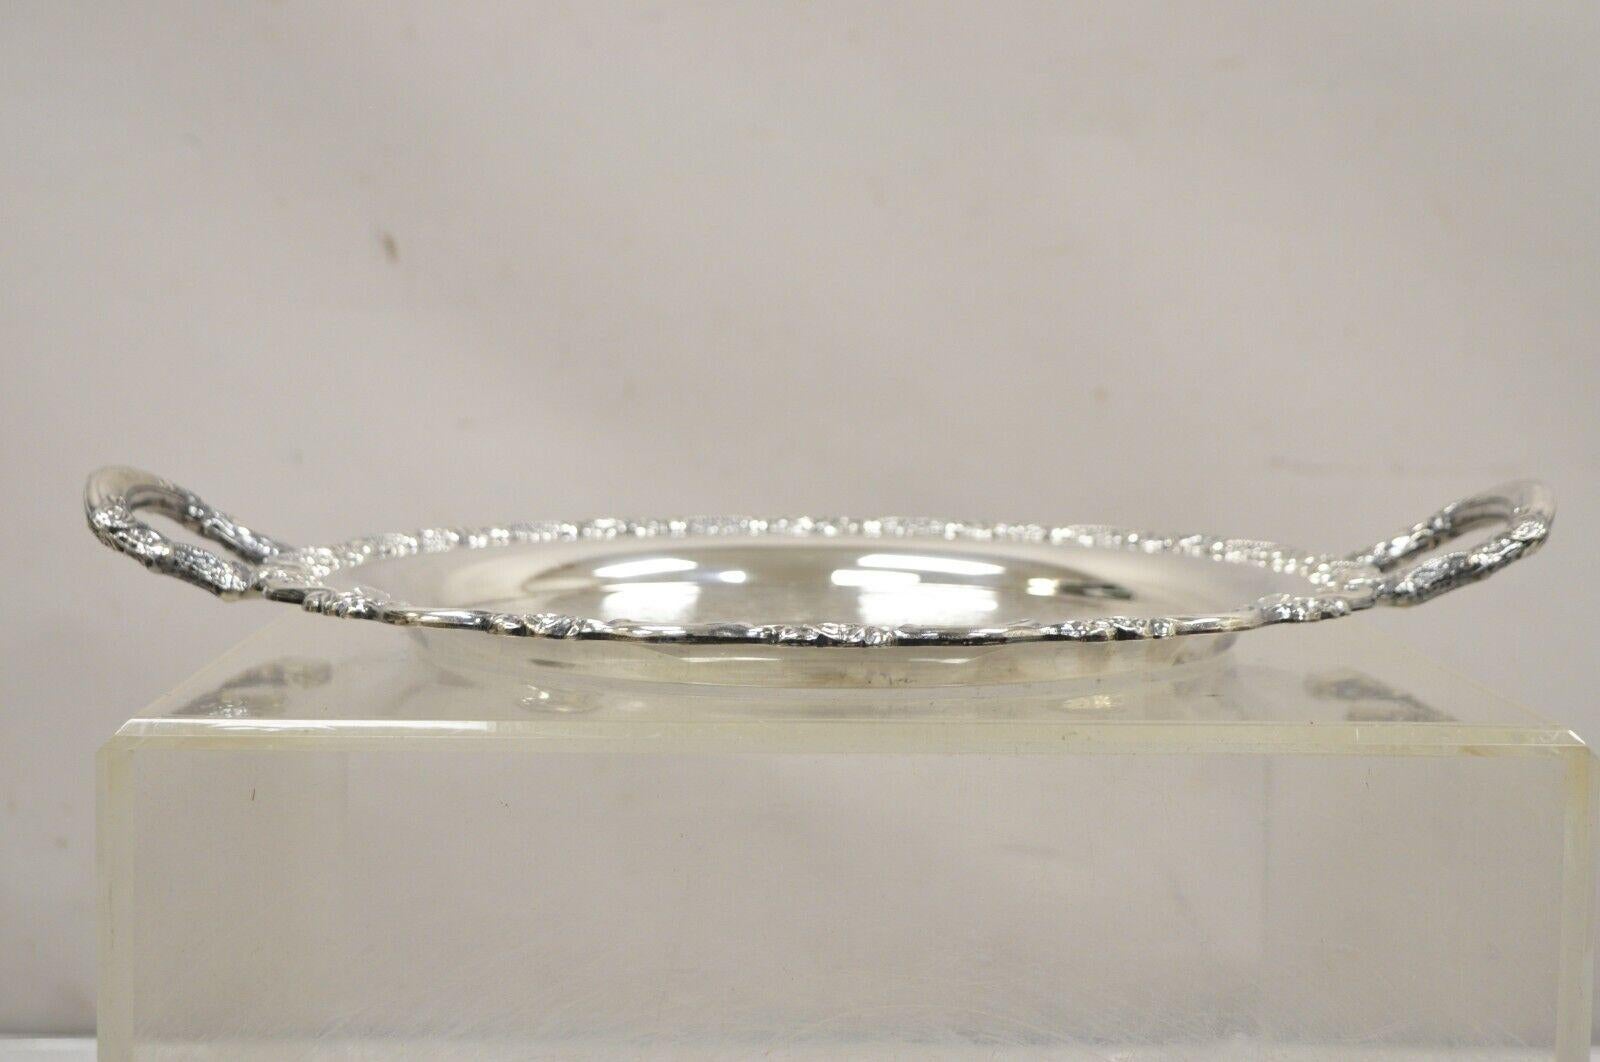 Vintage Oneida Victorian Style Round Silver Plated Serving Platter Tray with Raised Handles. Circa Mid to Late 20th Century.
Mesures :  2